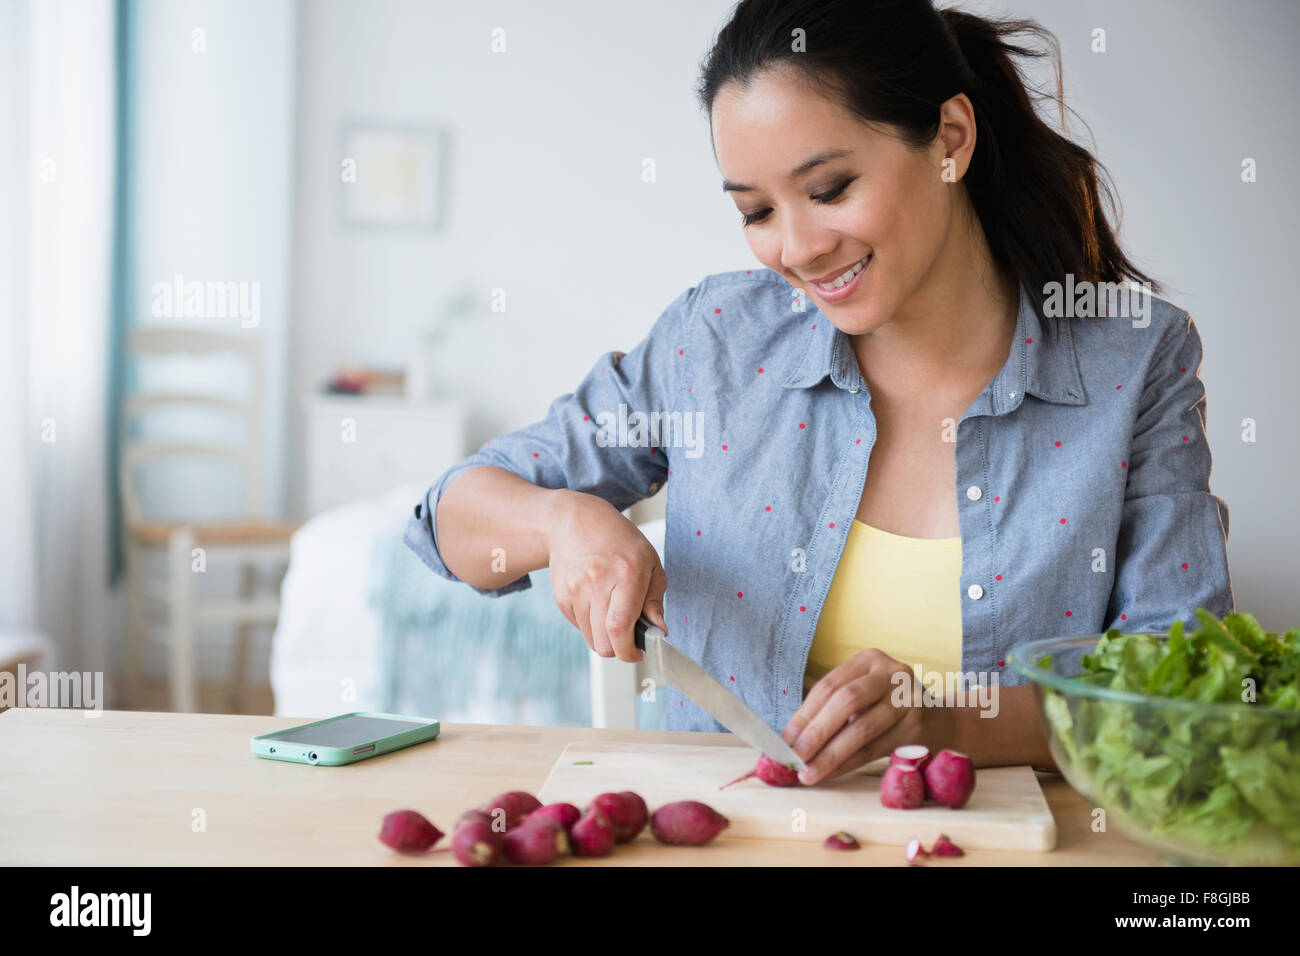 Chinese woman preparing salad Banque D'Images